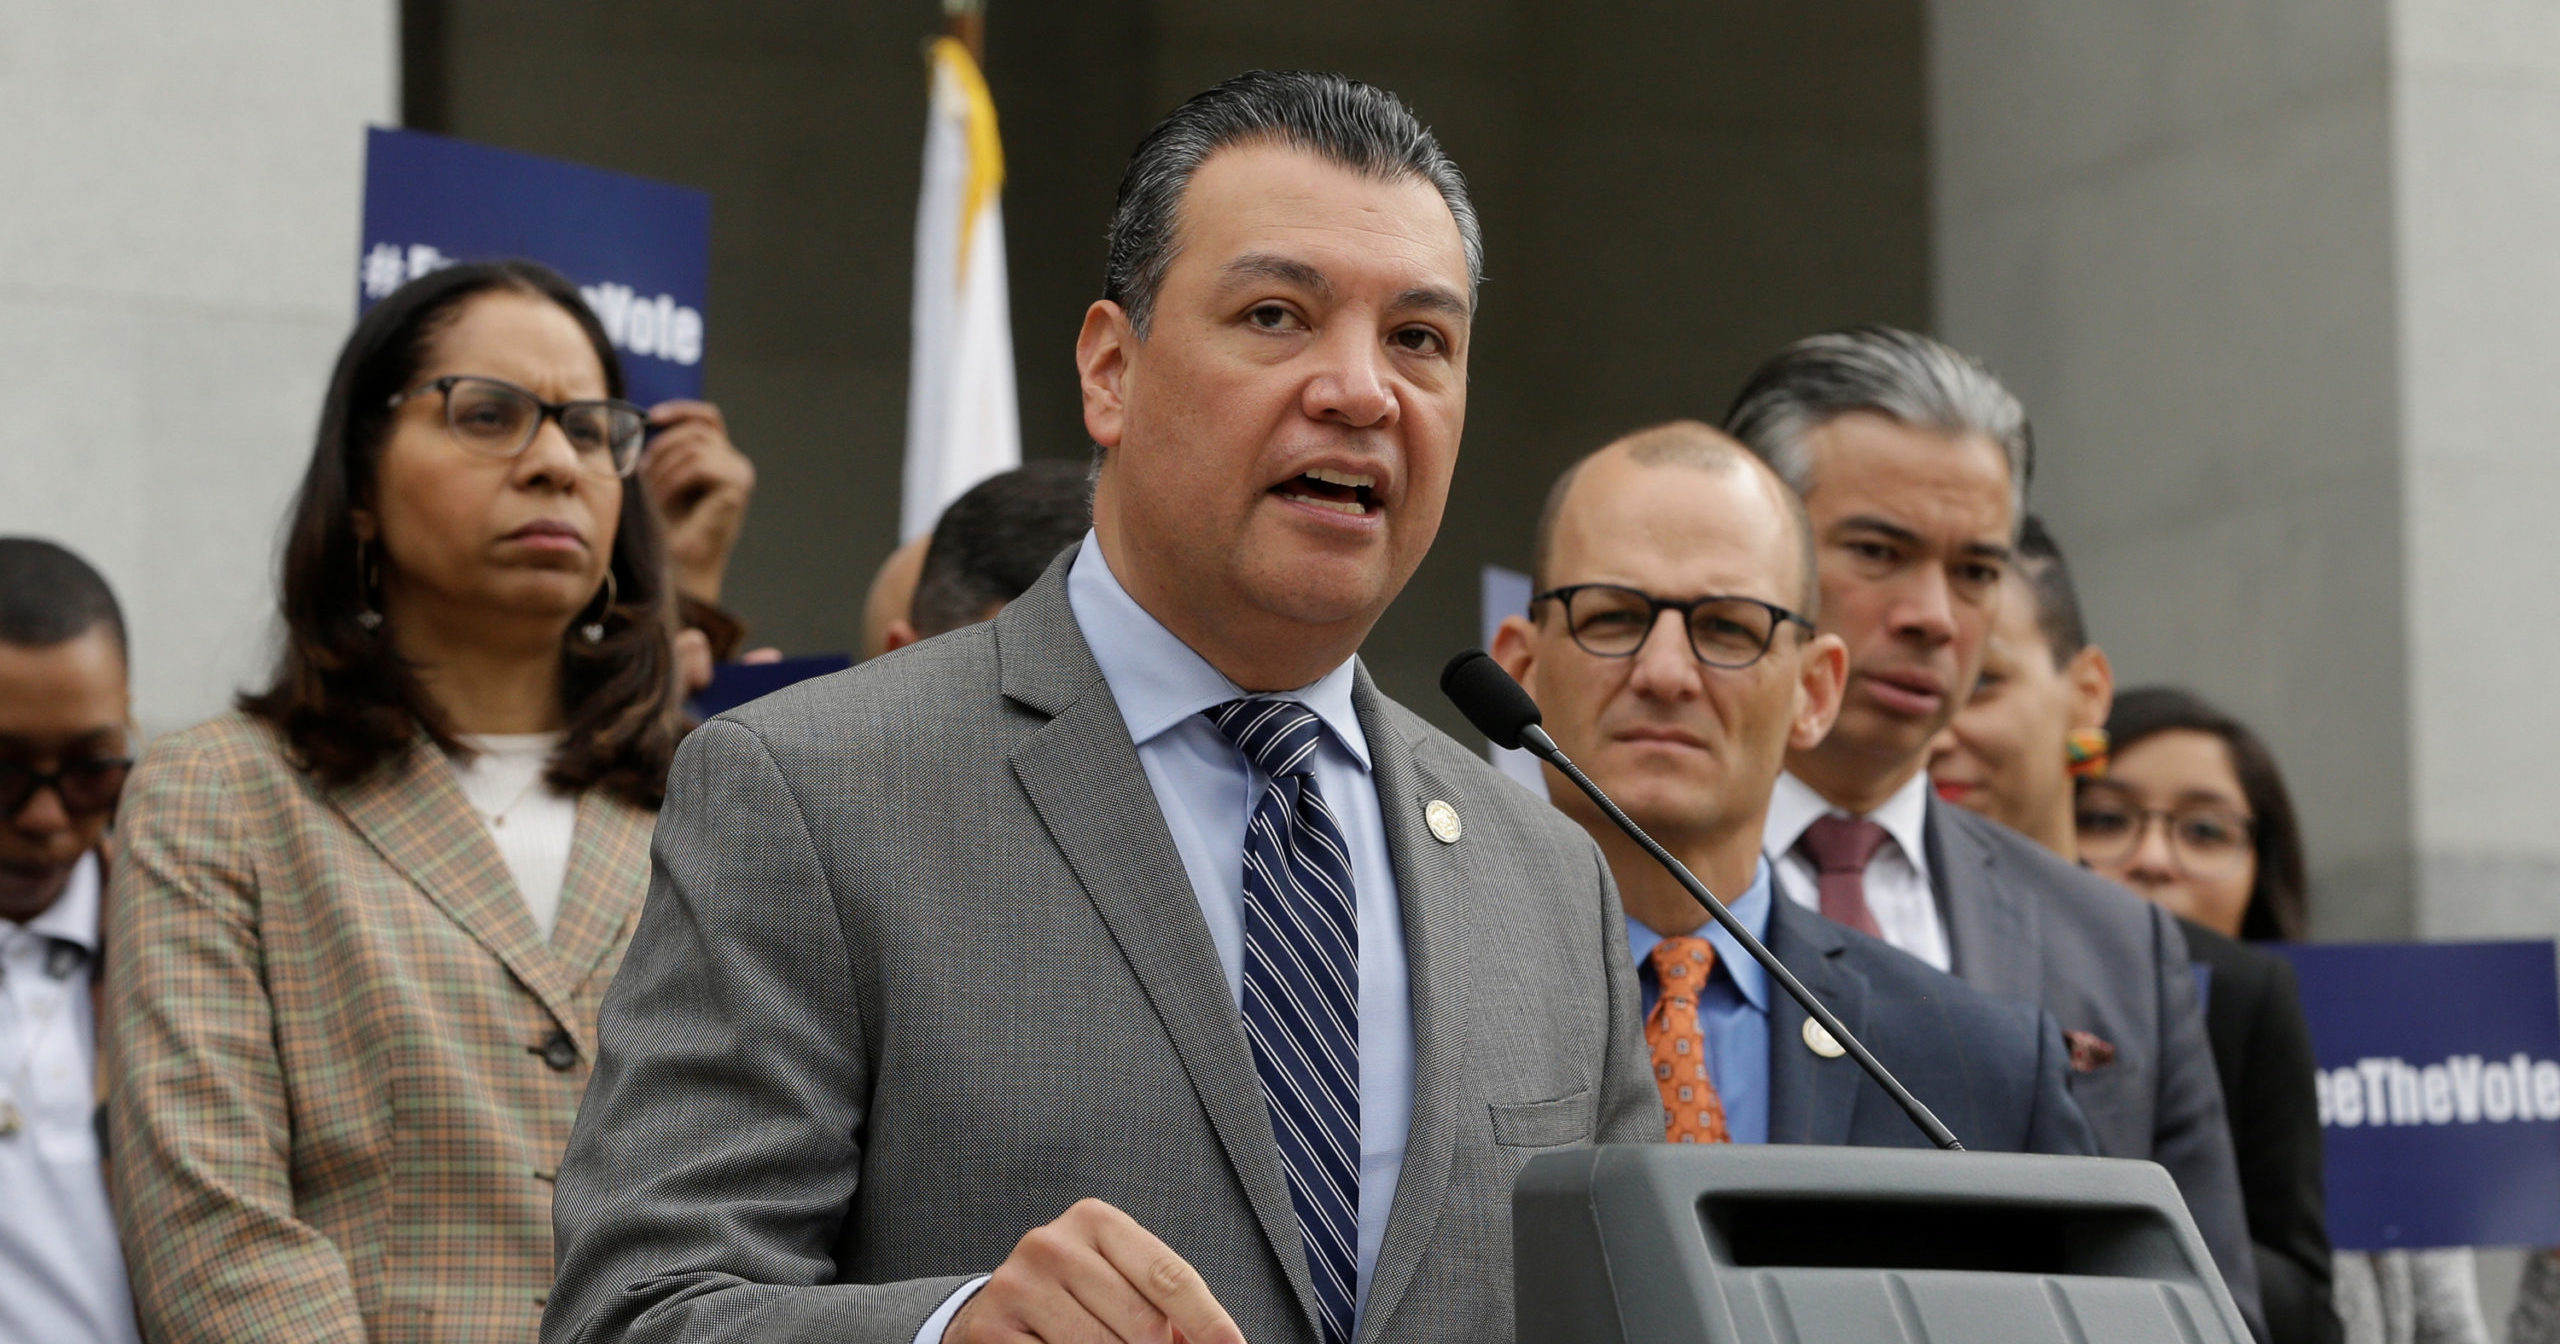 California Secretary of State Alex Padilla speaks during a news conference on Jan. 28, 2019, in Sacramento, California.